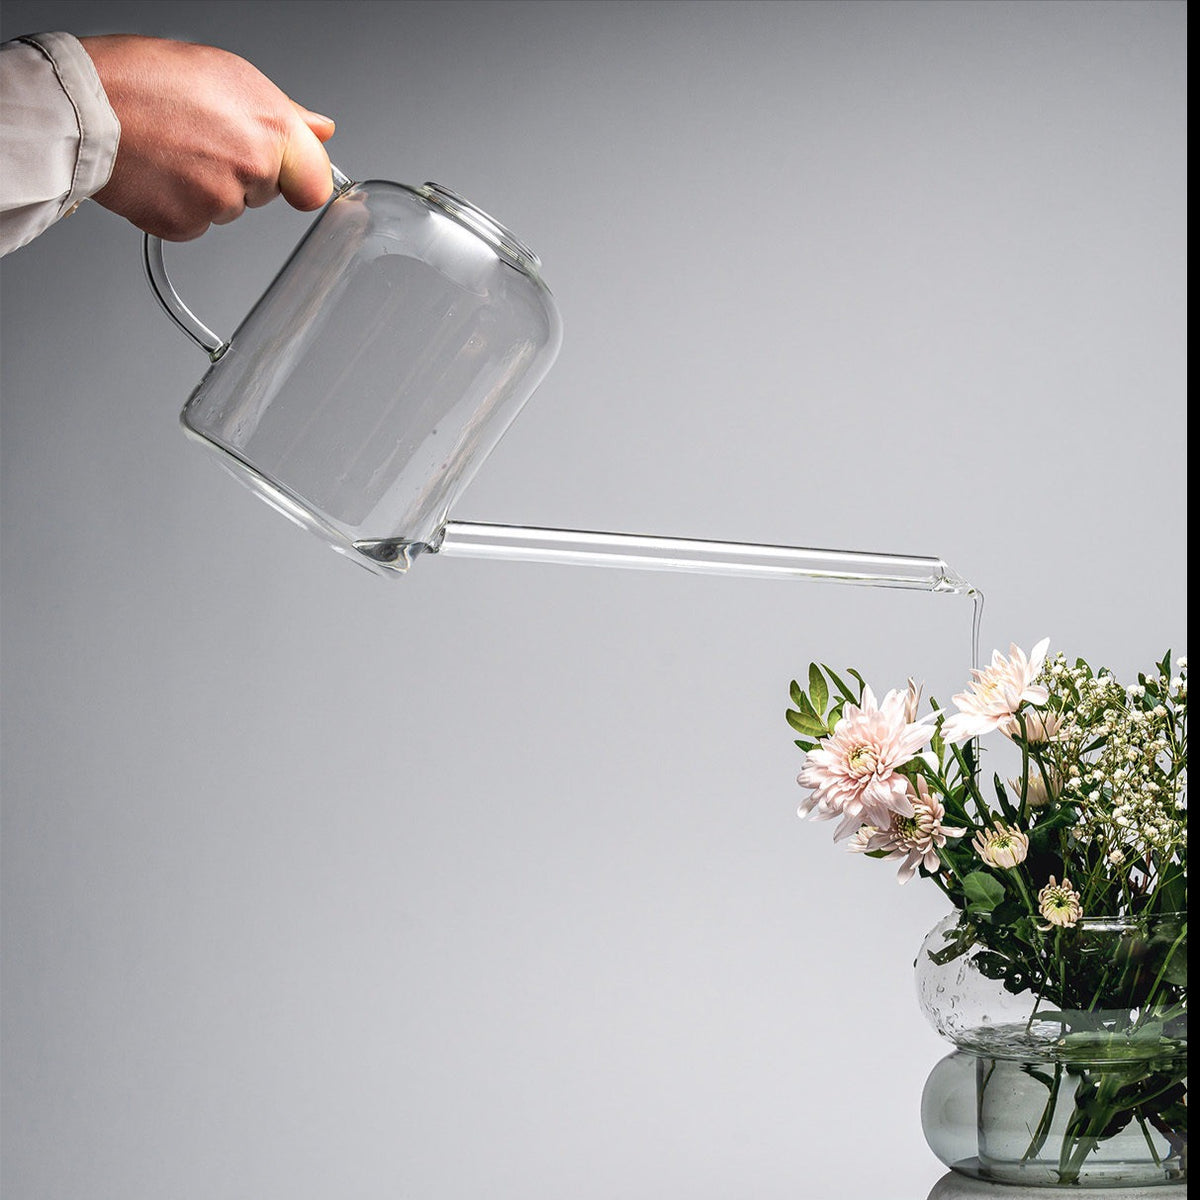 Water being poured from Muurla Design&#39;s Glass Watering Cans into a Muurla Bagel Vase full of flowers.